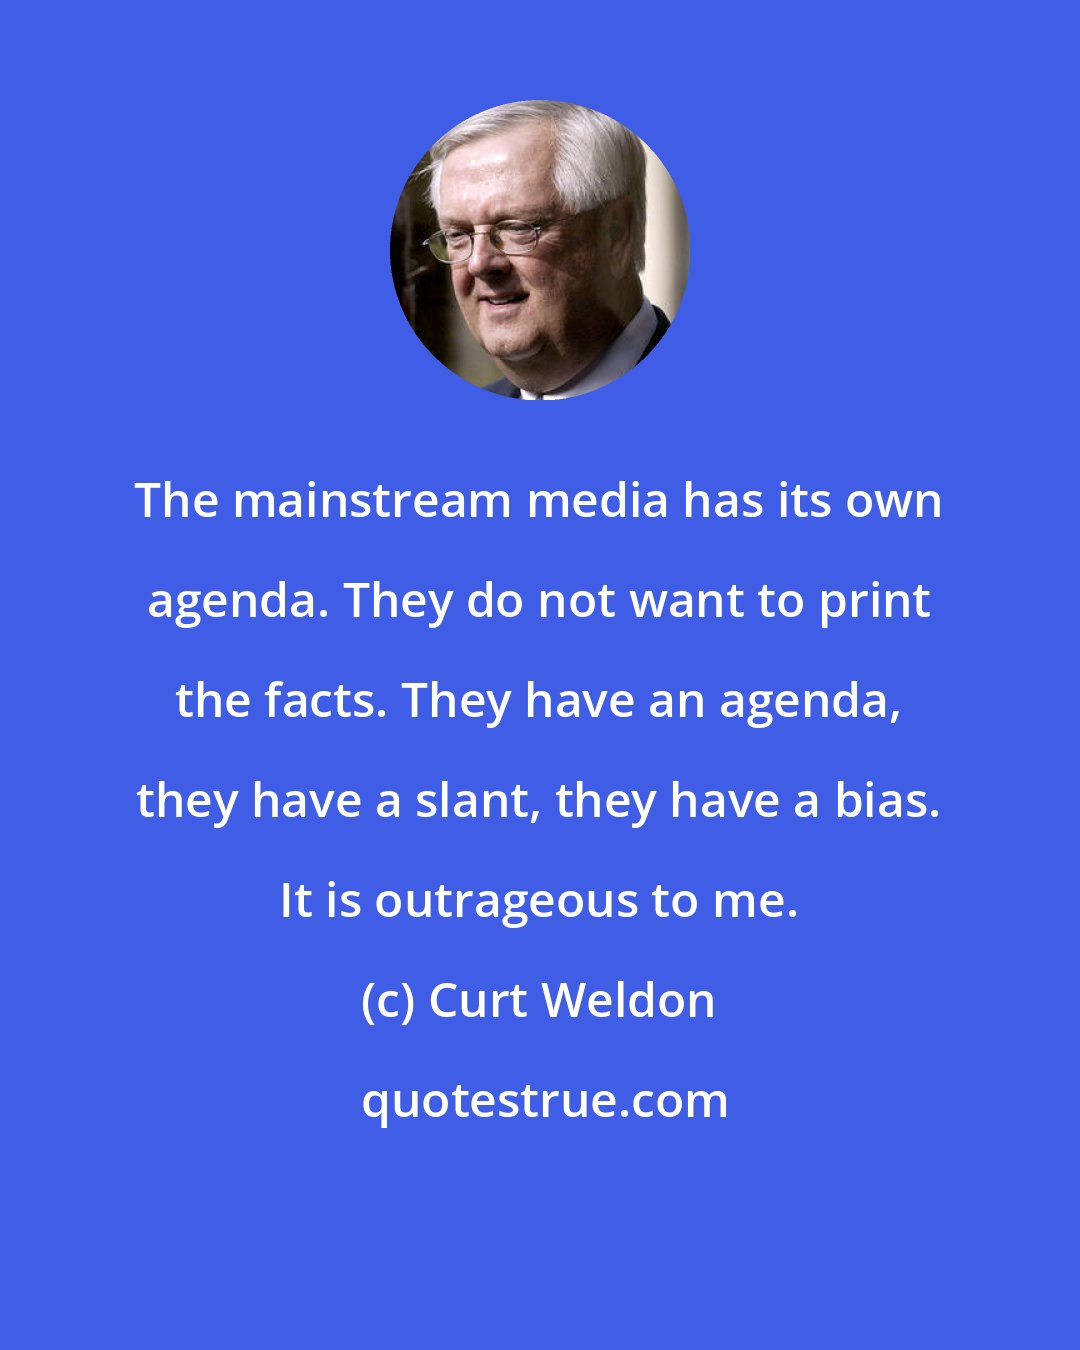 Curt Weldon: The mainstream media has its own agenda. They do not want to print the facts. They have an agenda, they have a slant, they have a bias. It is outrageous to me.